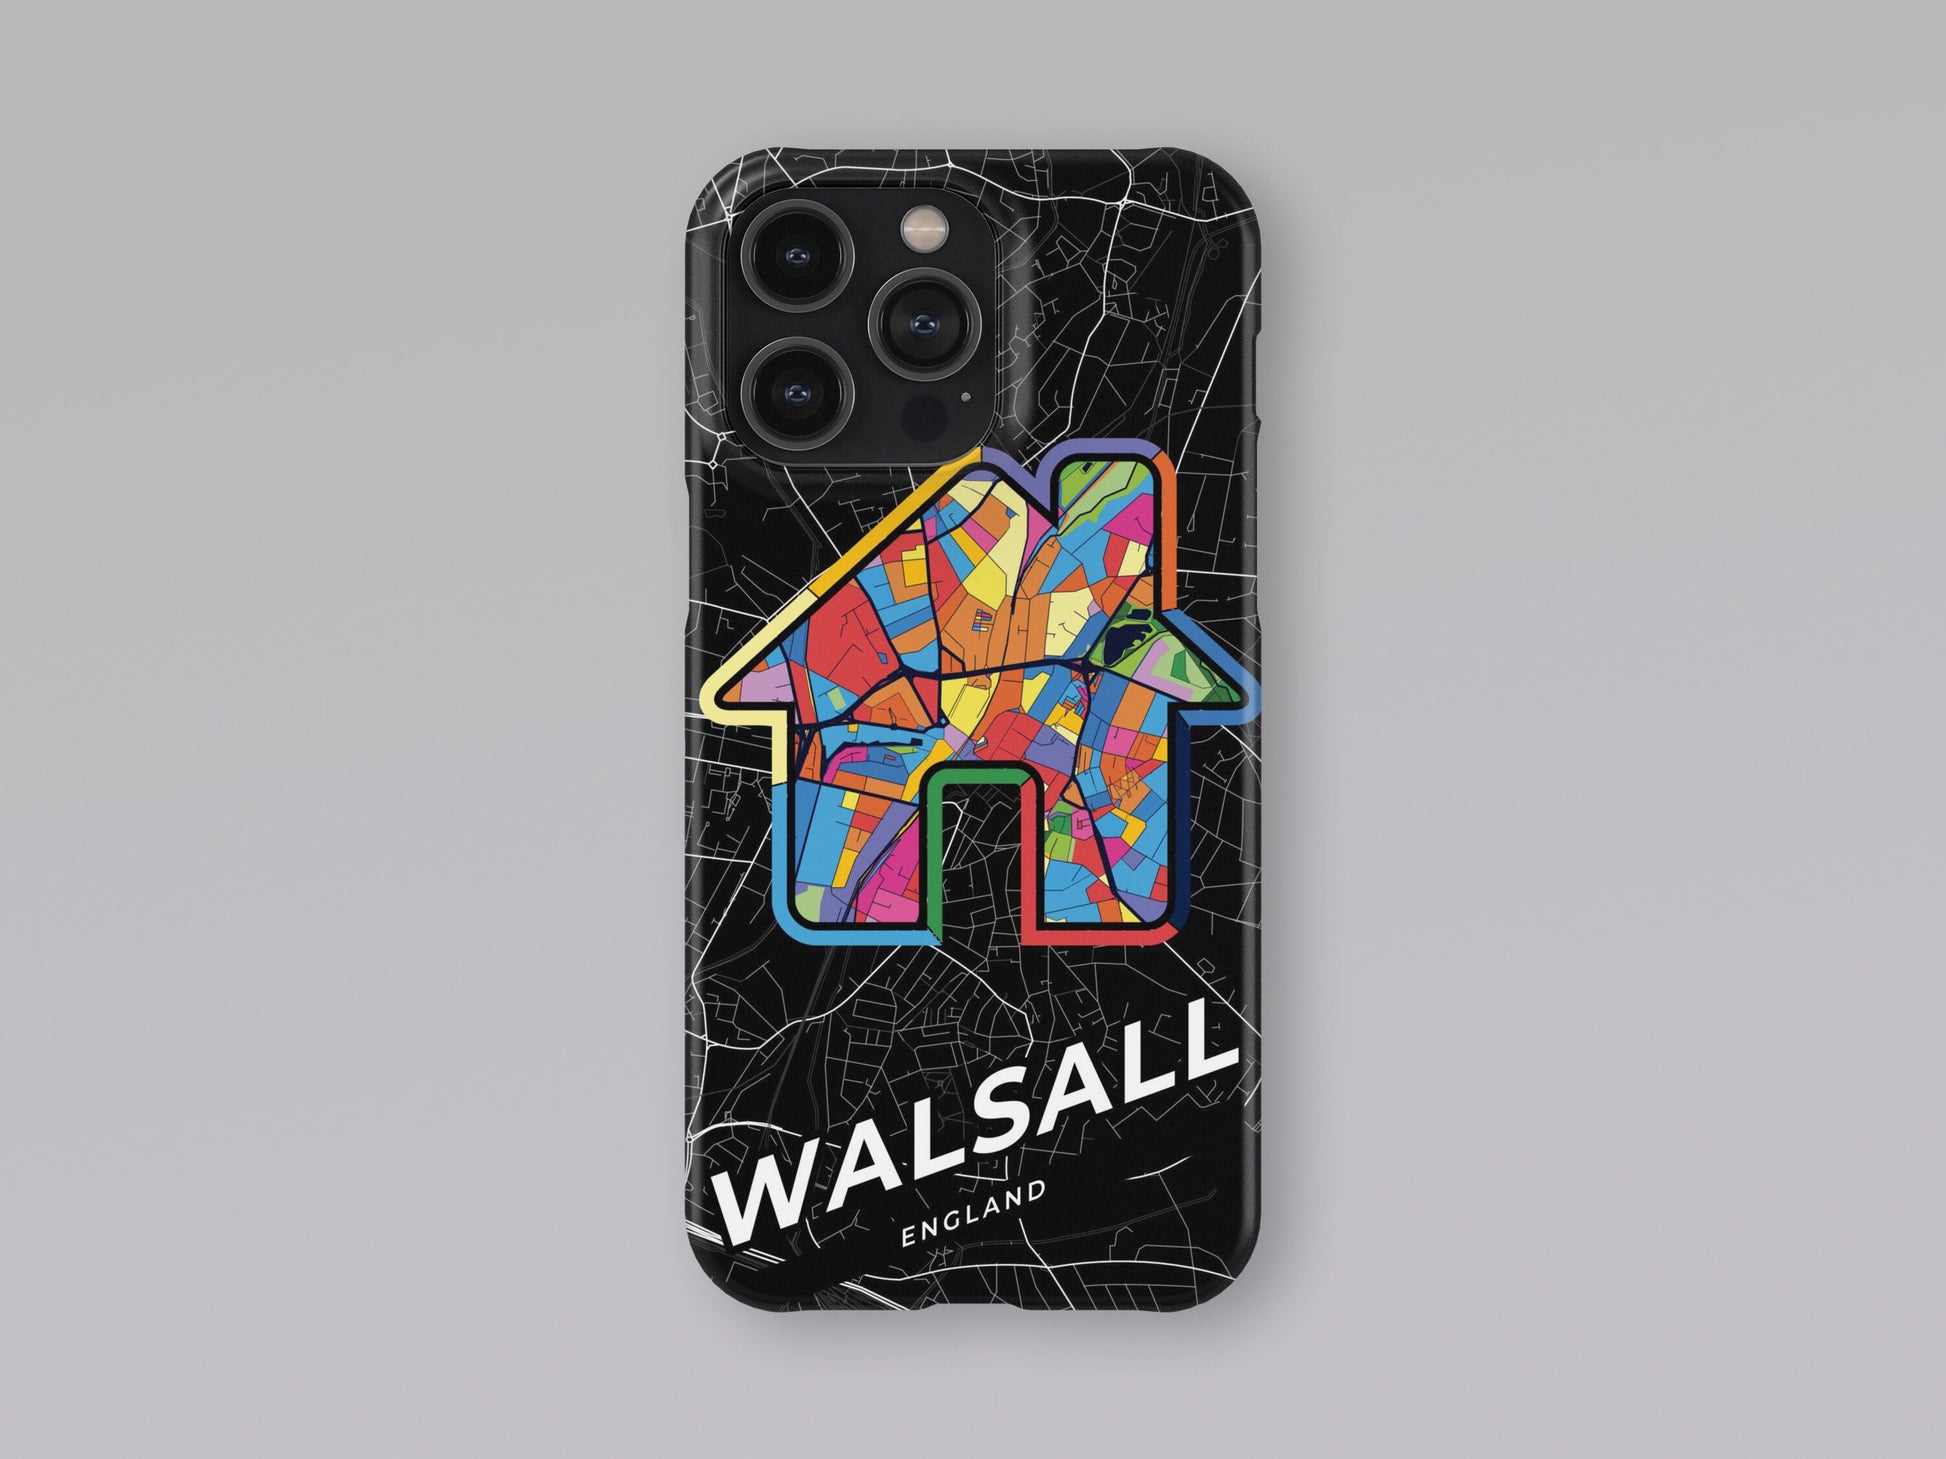 Walsall England slim phone case with colorful icon 3